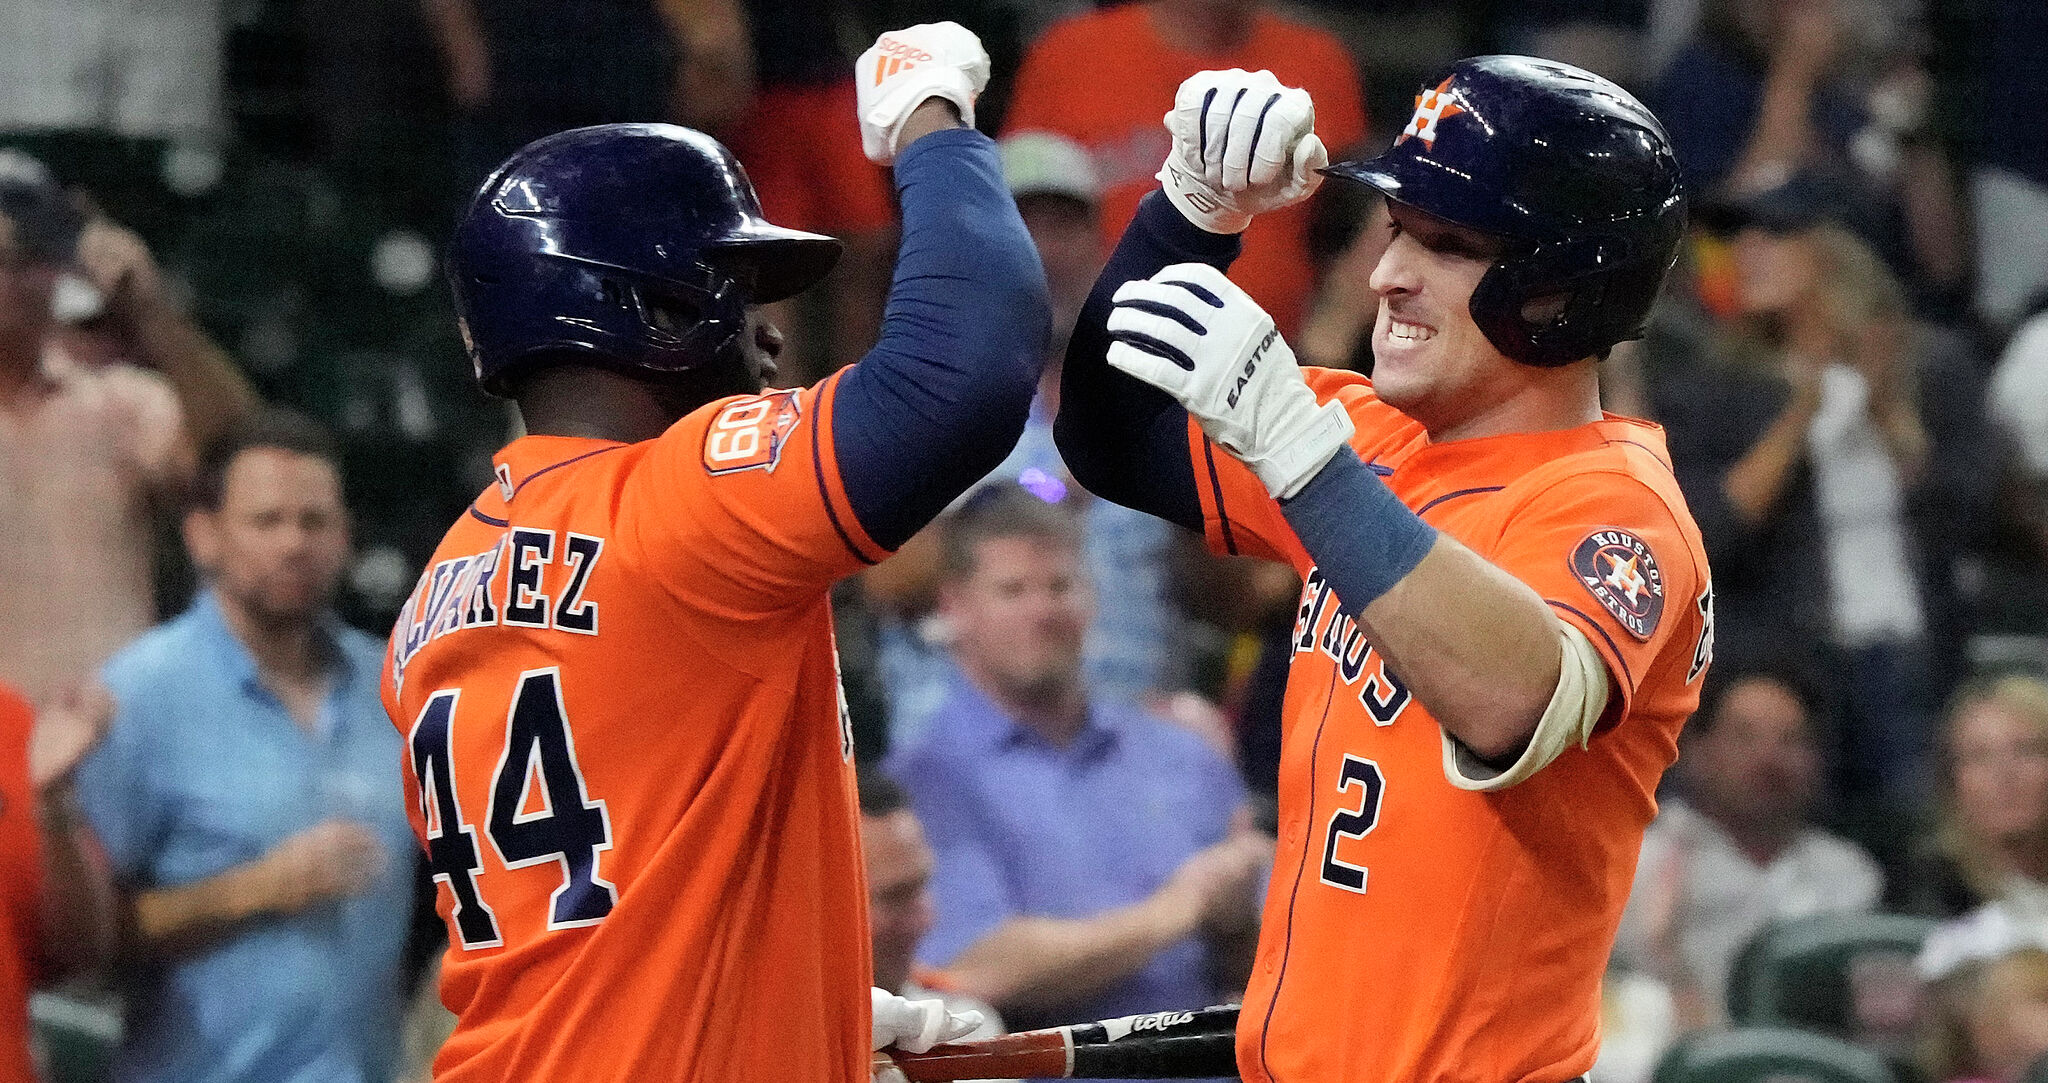 Houston Astros finalize their 2022 Opening Day roster